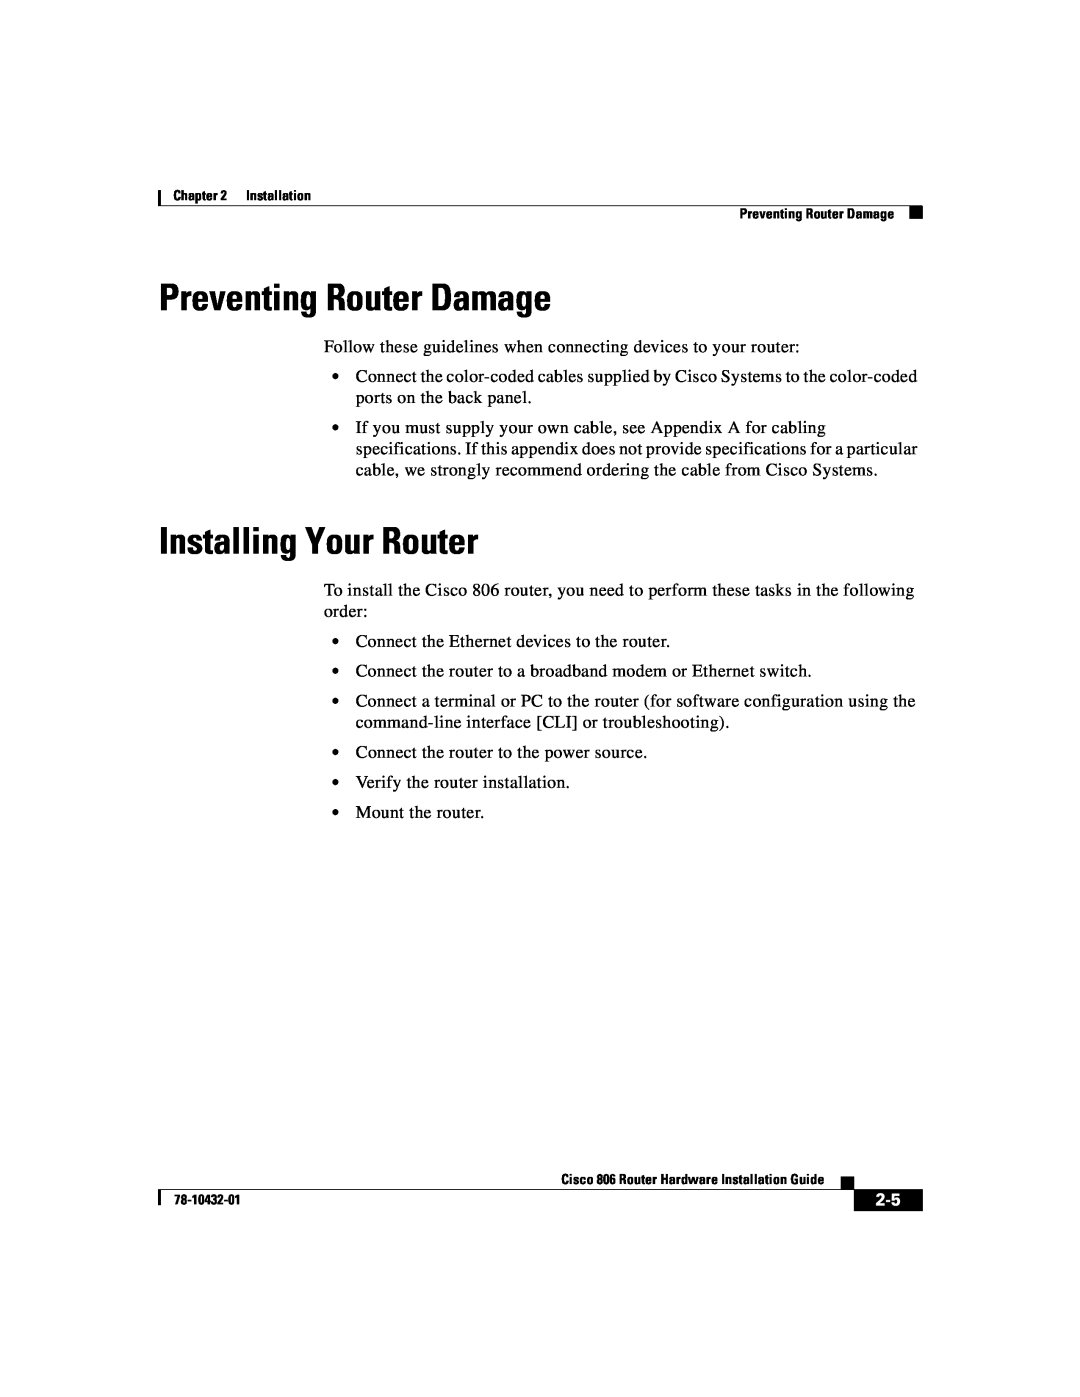 Cisco Systems 806 manual Preventing Router Damage, Installing Your Router 